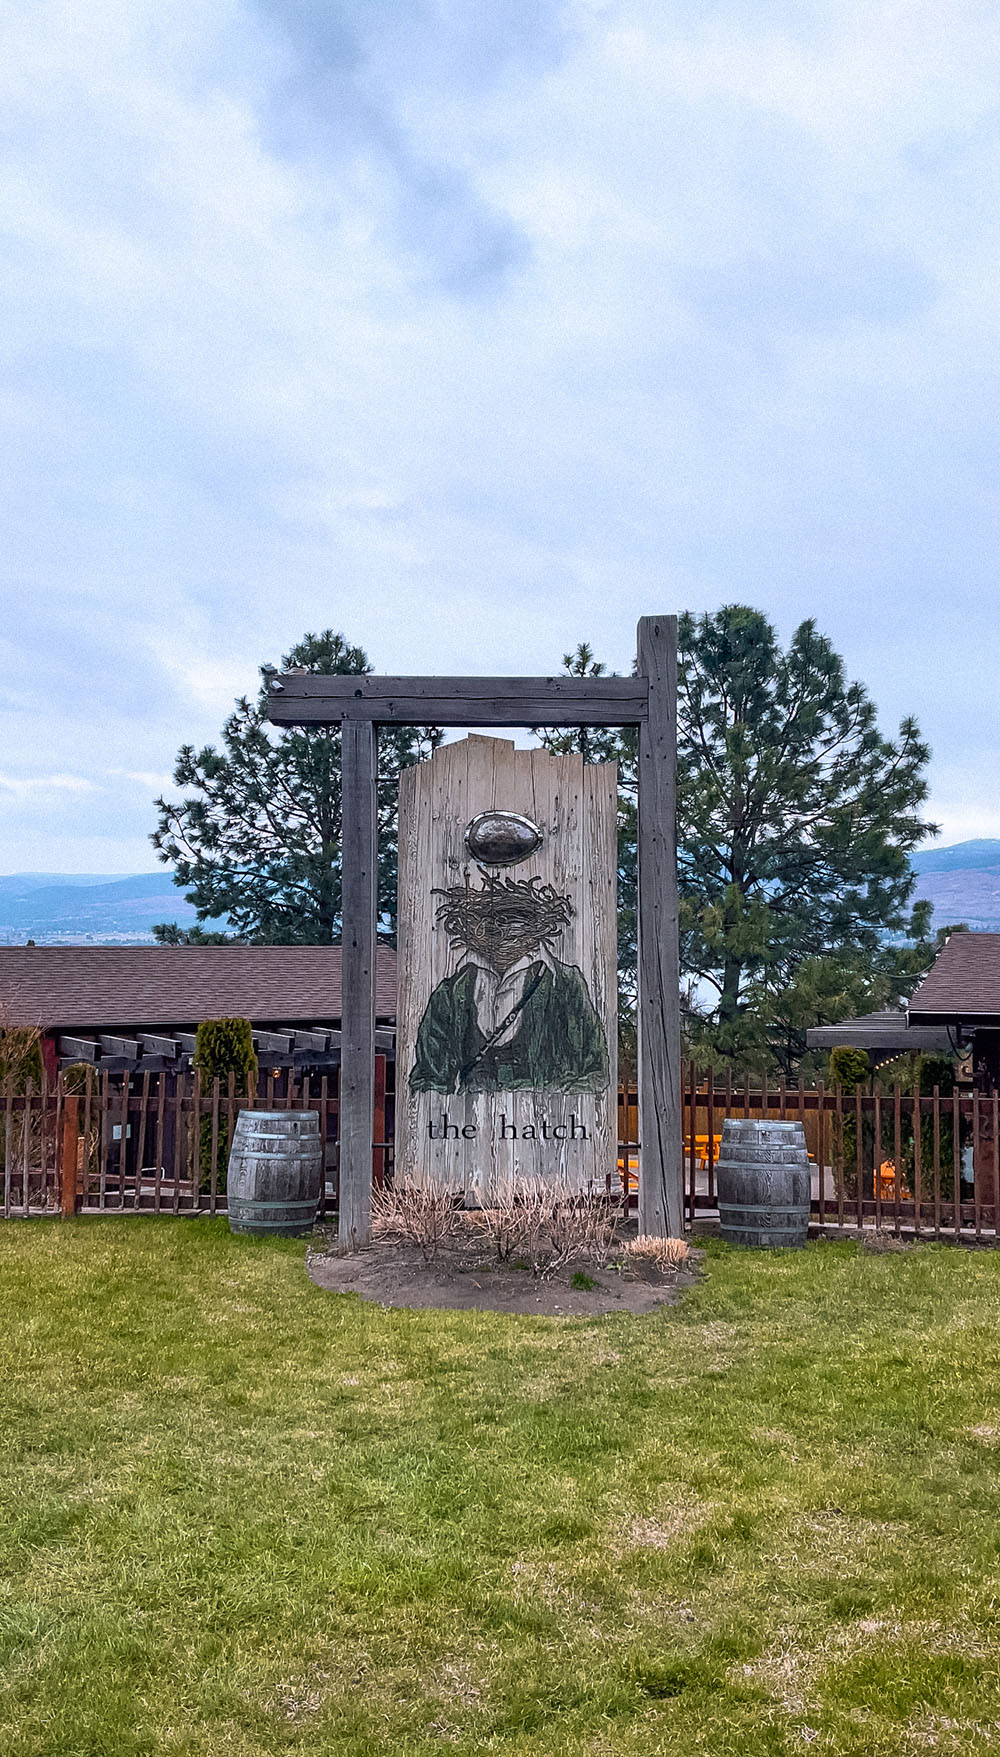 Planning a trip to Kelowna soon? This guide covers all the best things to do in Kelowna from a locals perspective! From wineries and cideries, to adventure activities, hikes, waters sports and more. This guide has everything you need to plan your visit to beautiful Kelowna! Pictured here: Taste wine at The Hatch